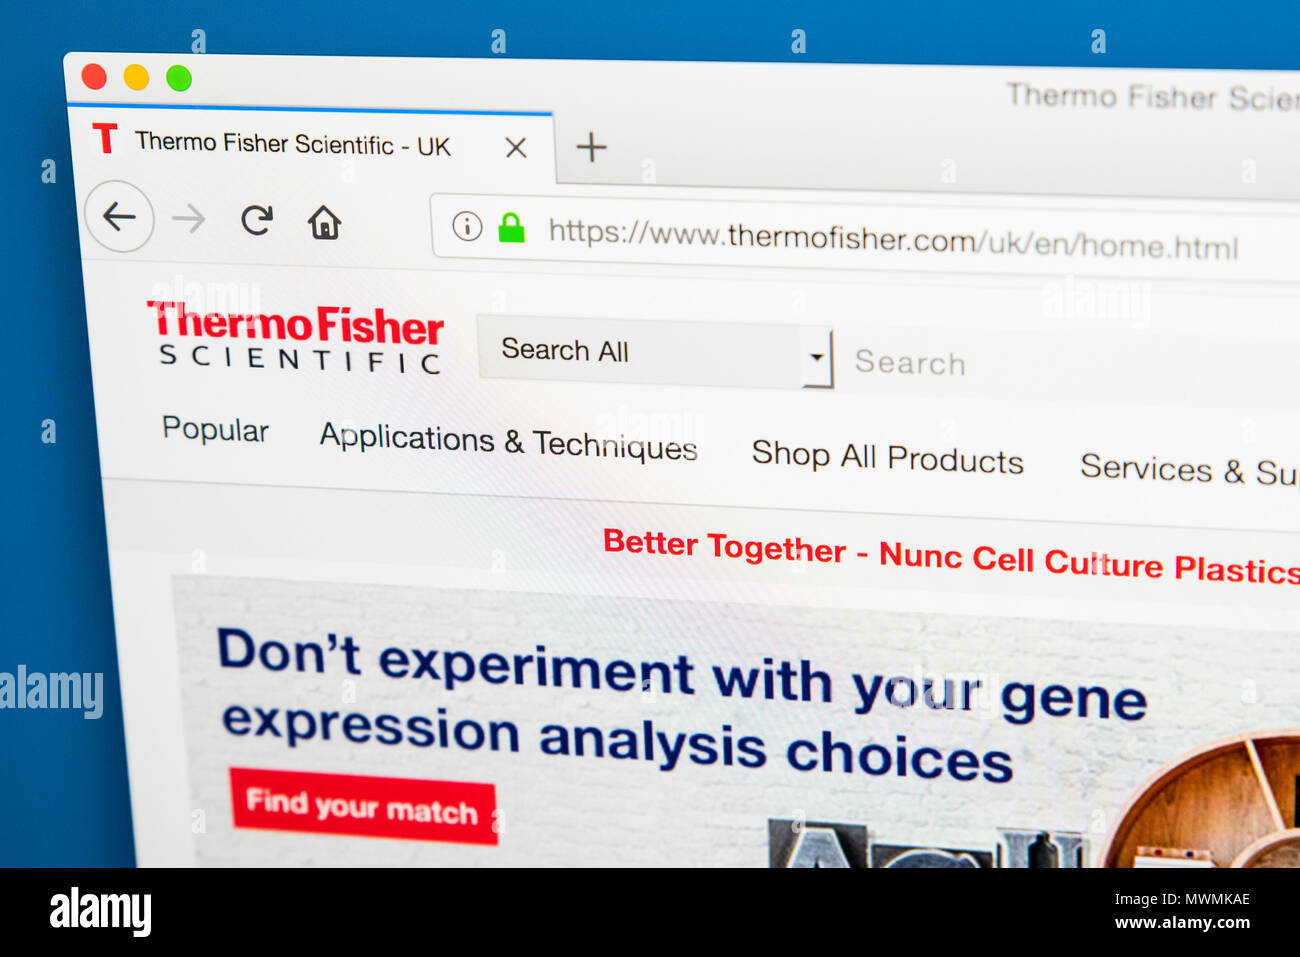 LONDON, UK - MAY 31ST 2018: The homepage of the official website for Thermo Fisher Scientific - the American multinational biotechnology product devel Stock Photo